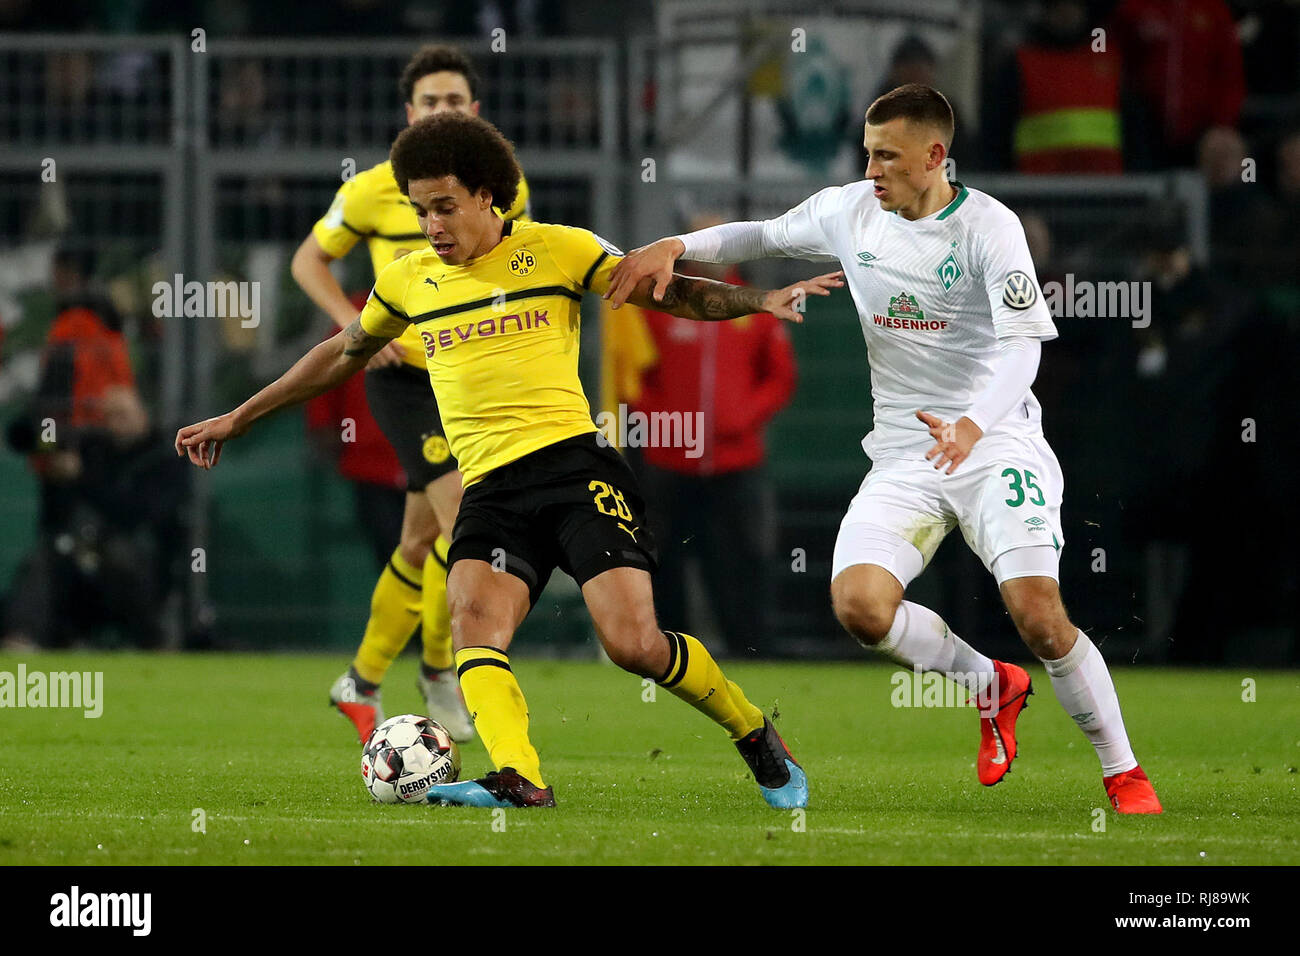 Dortmund, Germany. 5th Feb, 2019. Axel Witsel (L) of Dortmund vies with Maximilian Eggestein of Bremen during the DFB Cup thrid round match between Borussia Dortmund and SV Werder Bremen in Dortmund, Germany, on Feb. 5, 2019. Credit: Joachim Bywaletz/Xinhua/Alamy Live News Stock Photo